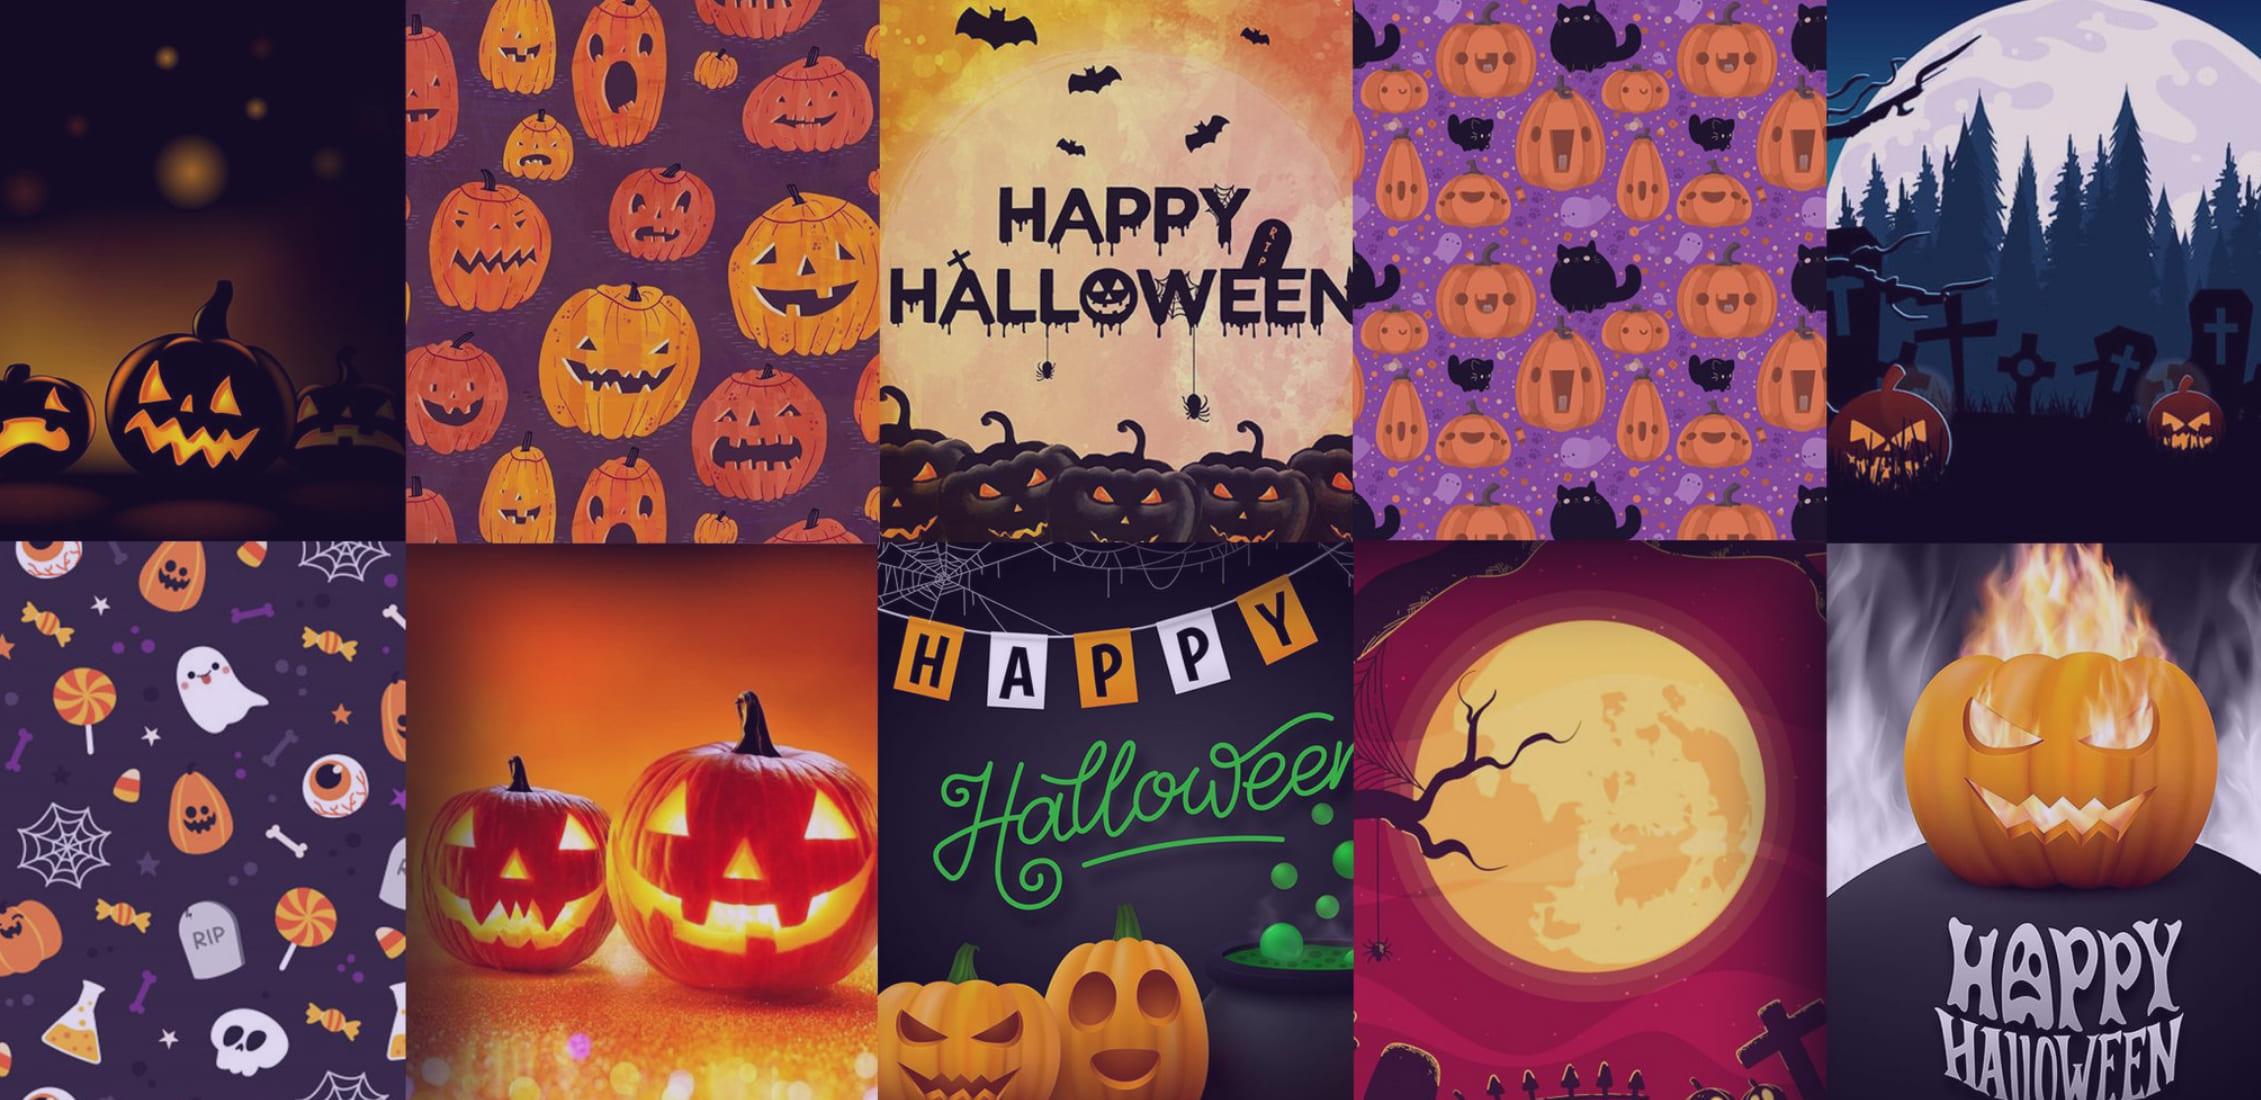 Best Halloween Background Image 2021. Scary & Cute Backgro